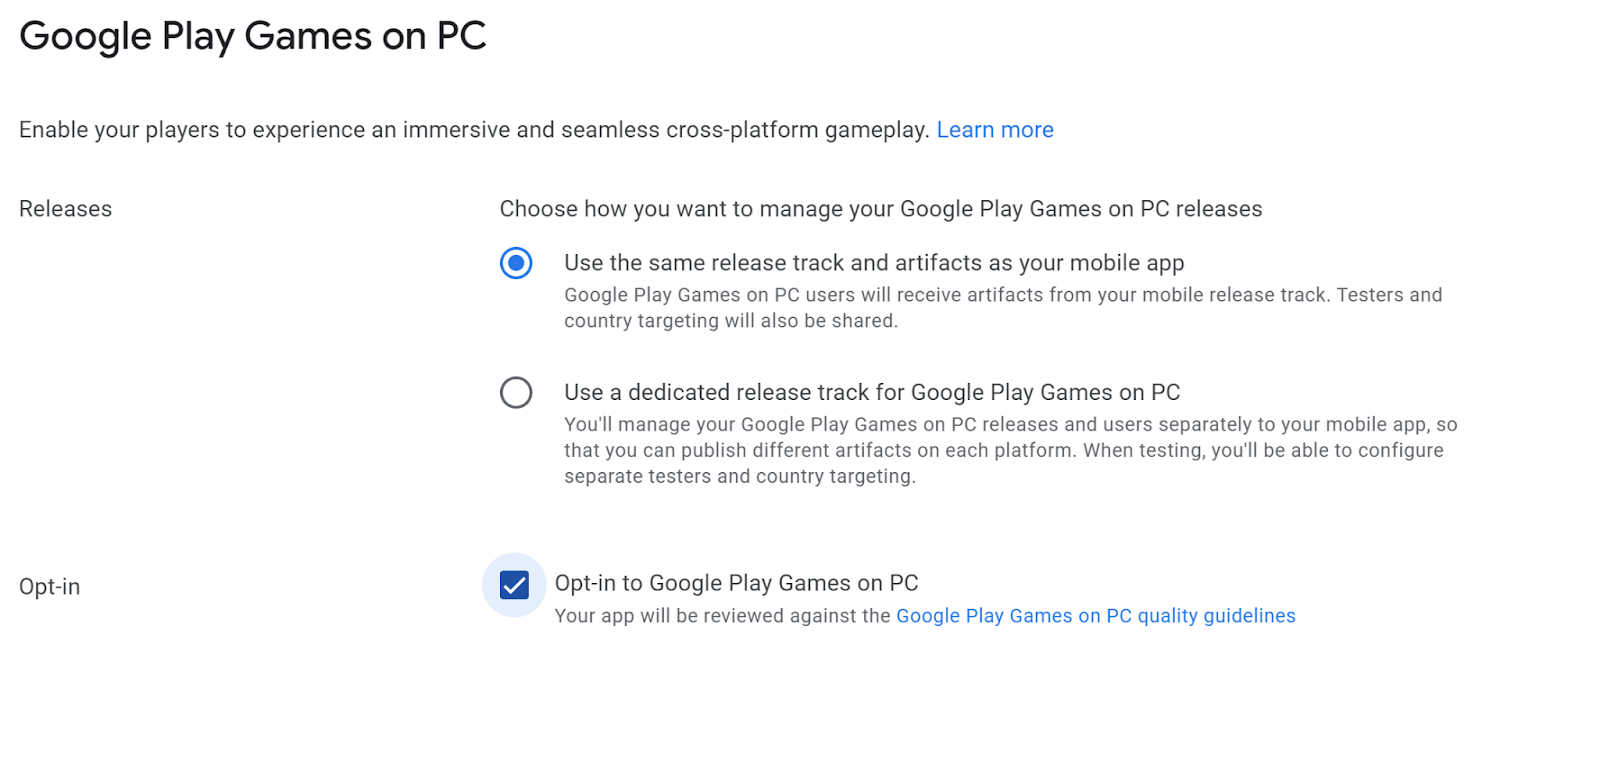 A screenshot of choice of whether use dedicated track for Google Play Games on PC